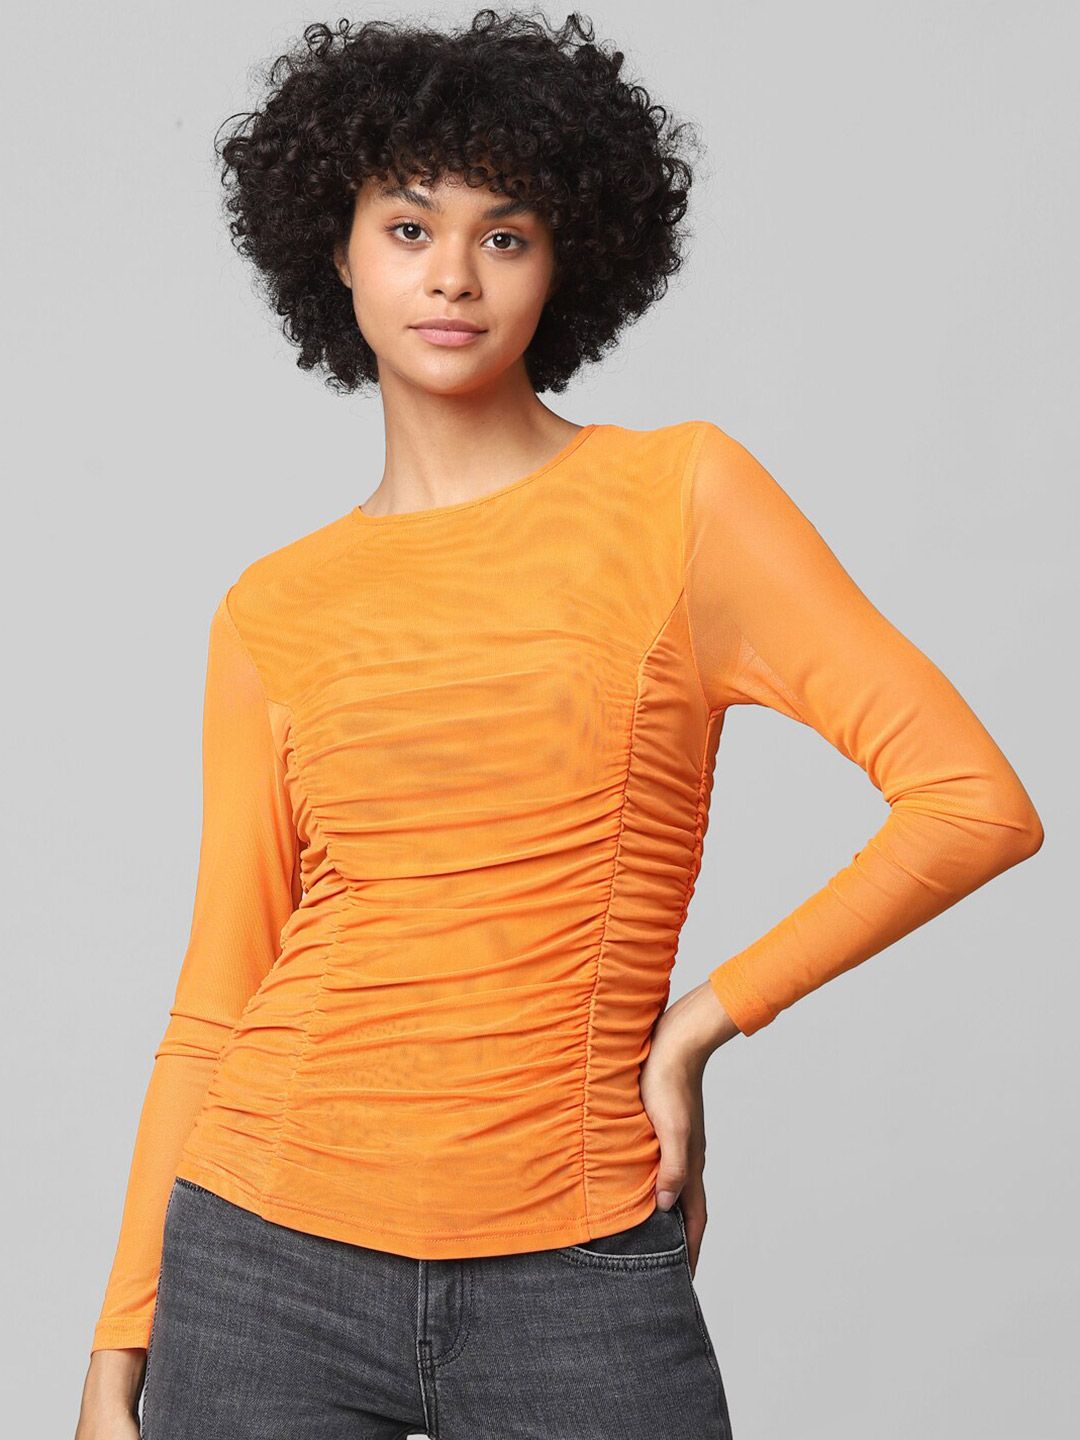 ONLY Orange & amber Striped Top Price in India